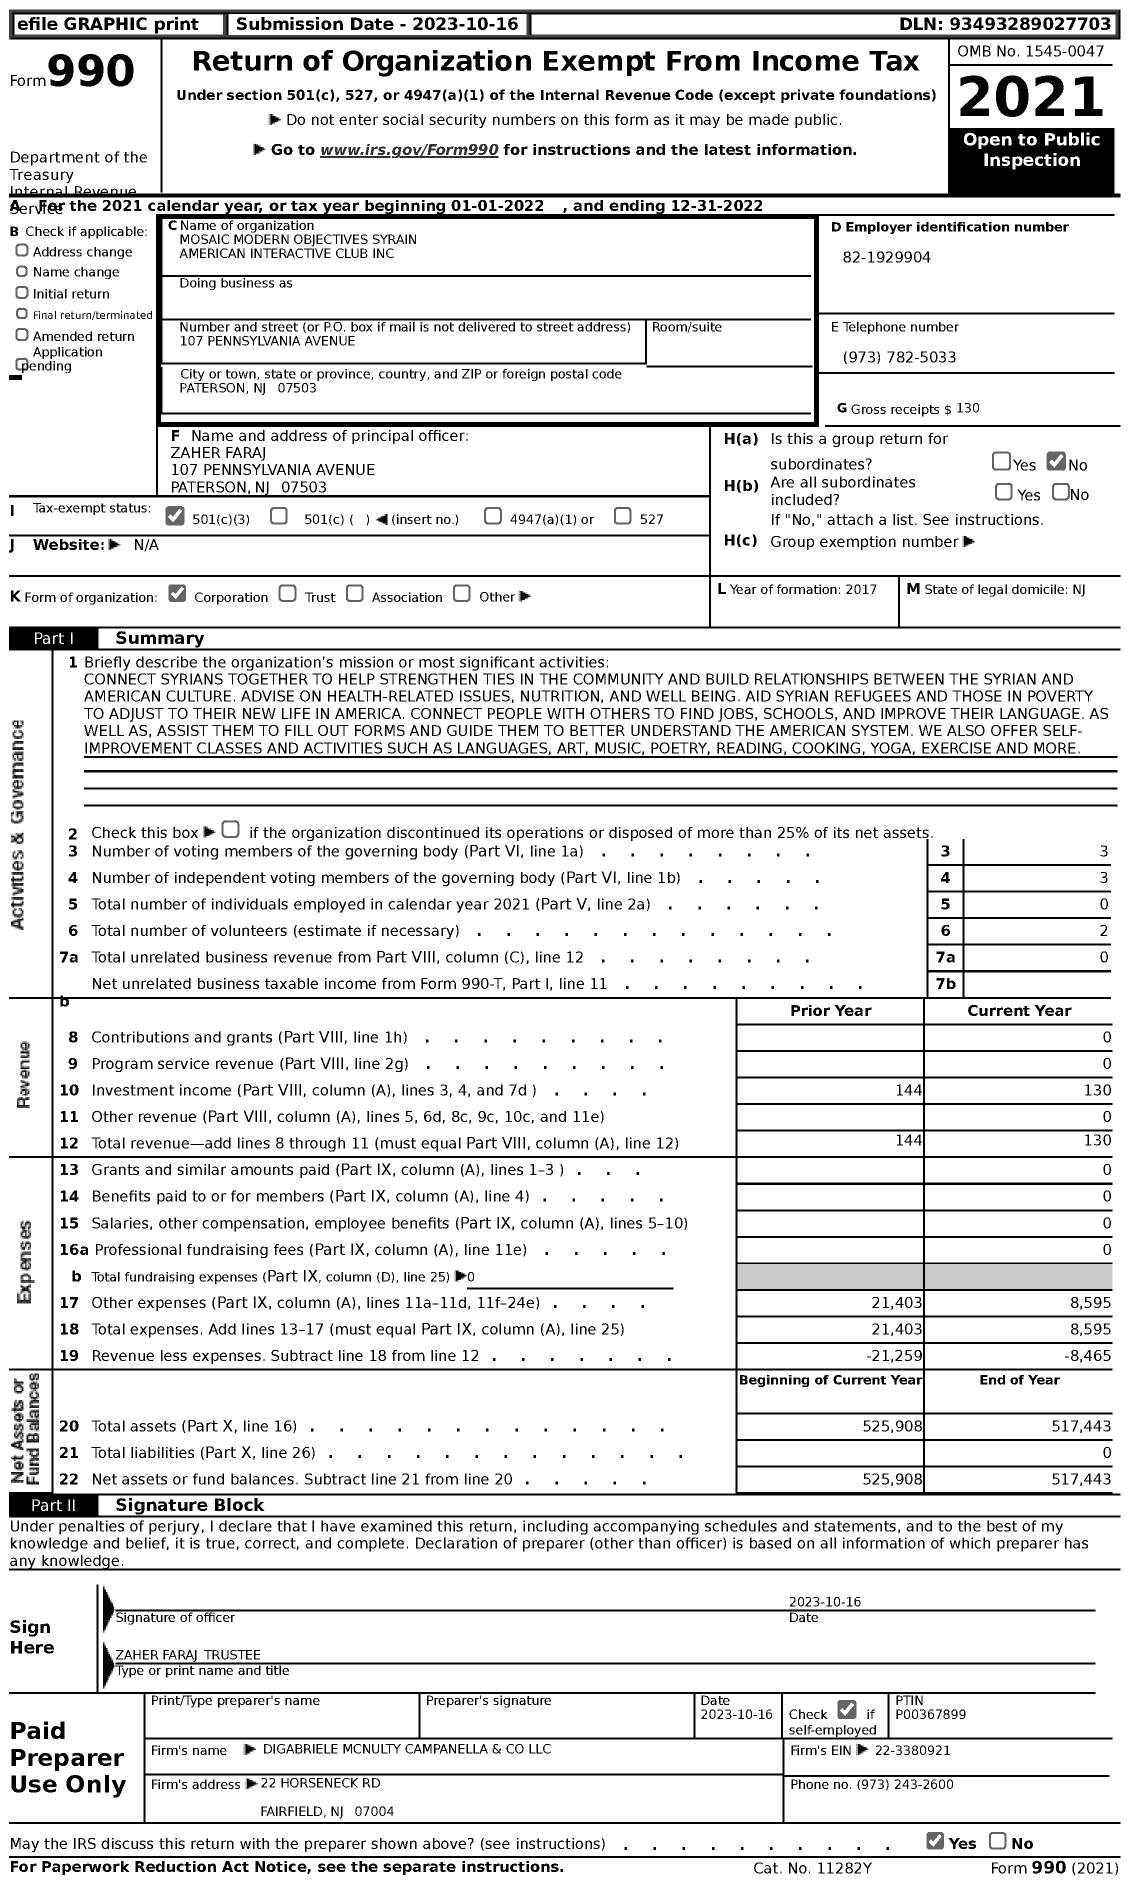 Image of first page of 2022 Form 990 for Mosaic Modern Objectives Syrain American Interactive Club